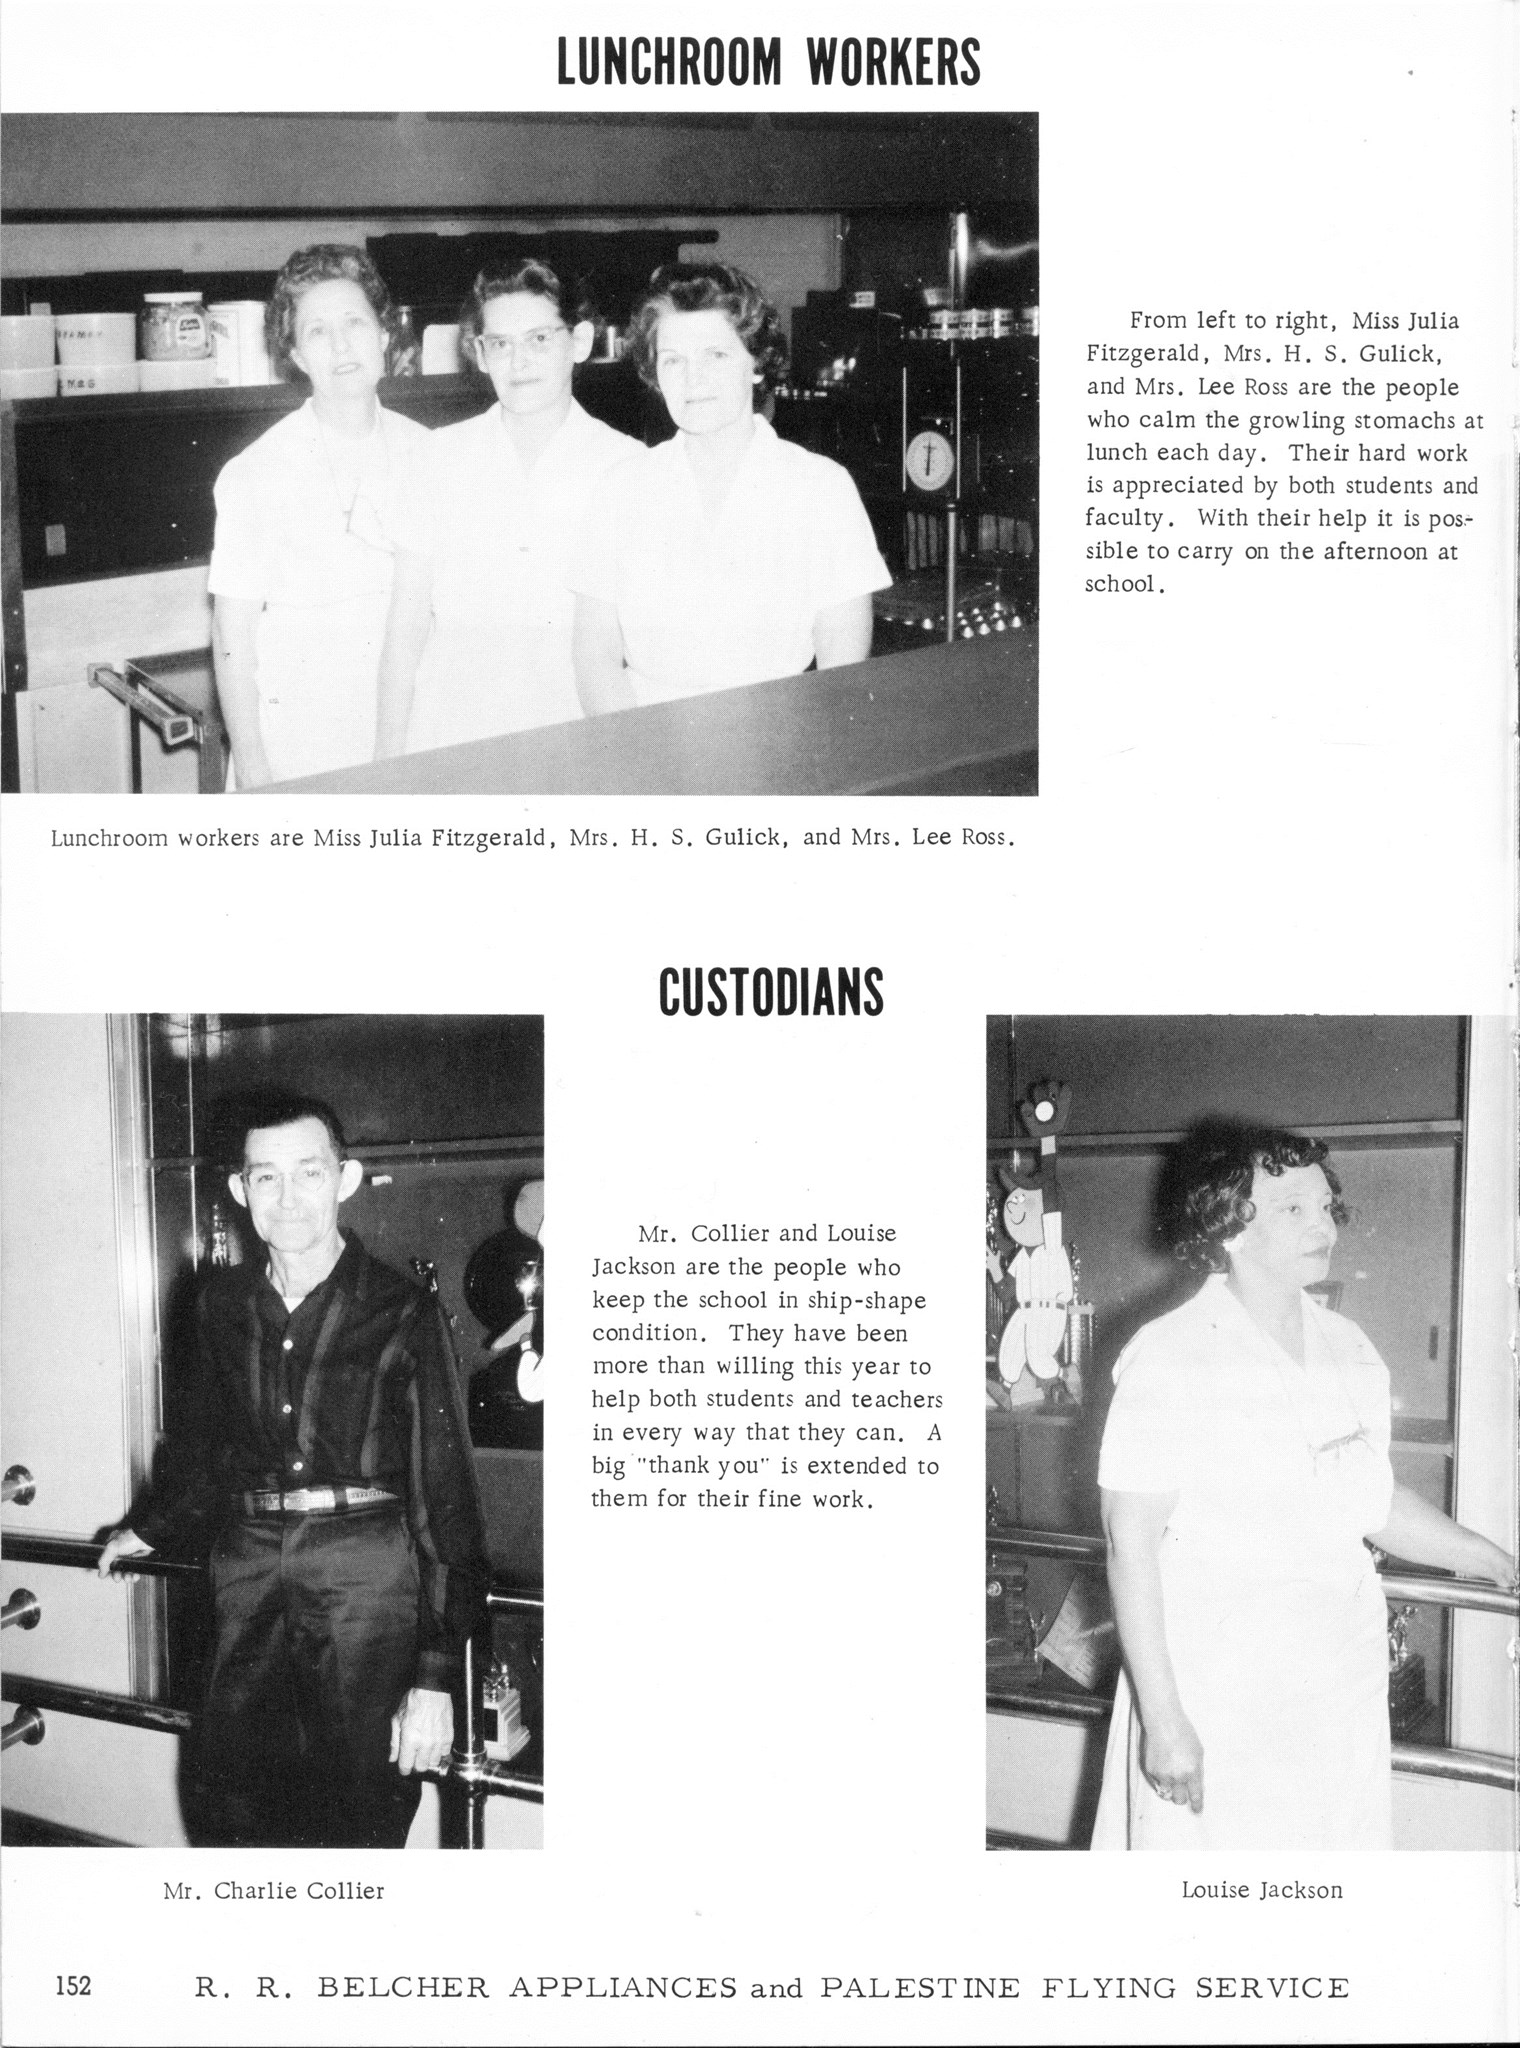 ../../../Images/Large/1964/Arclight-1964-pg0152.jpg